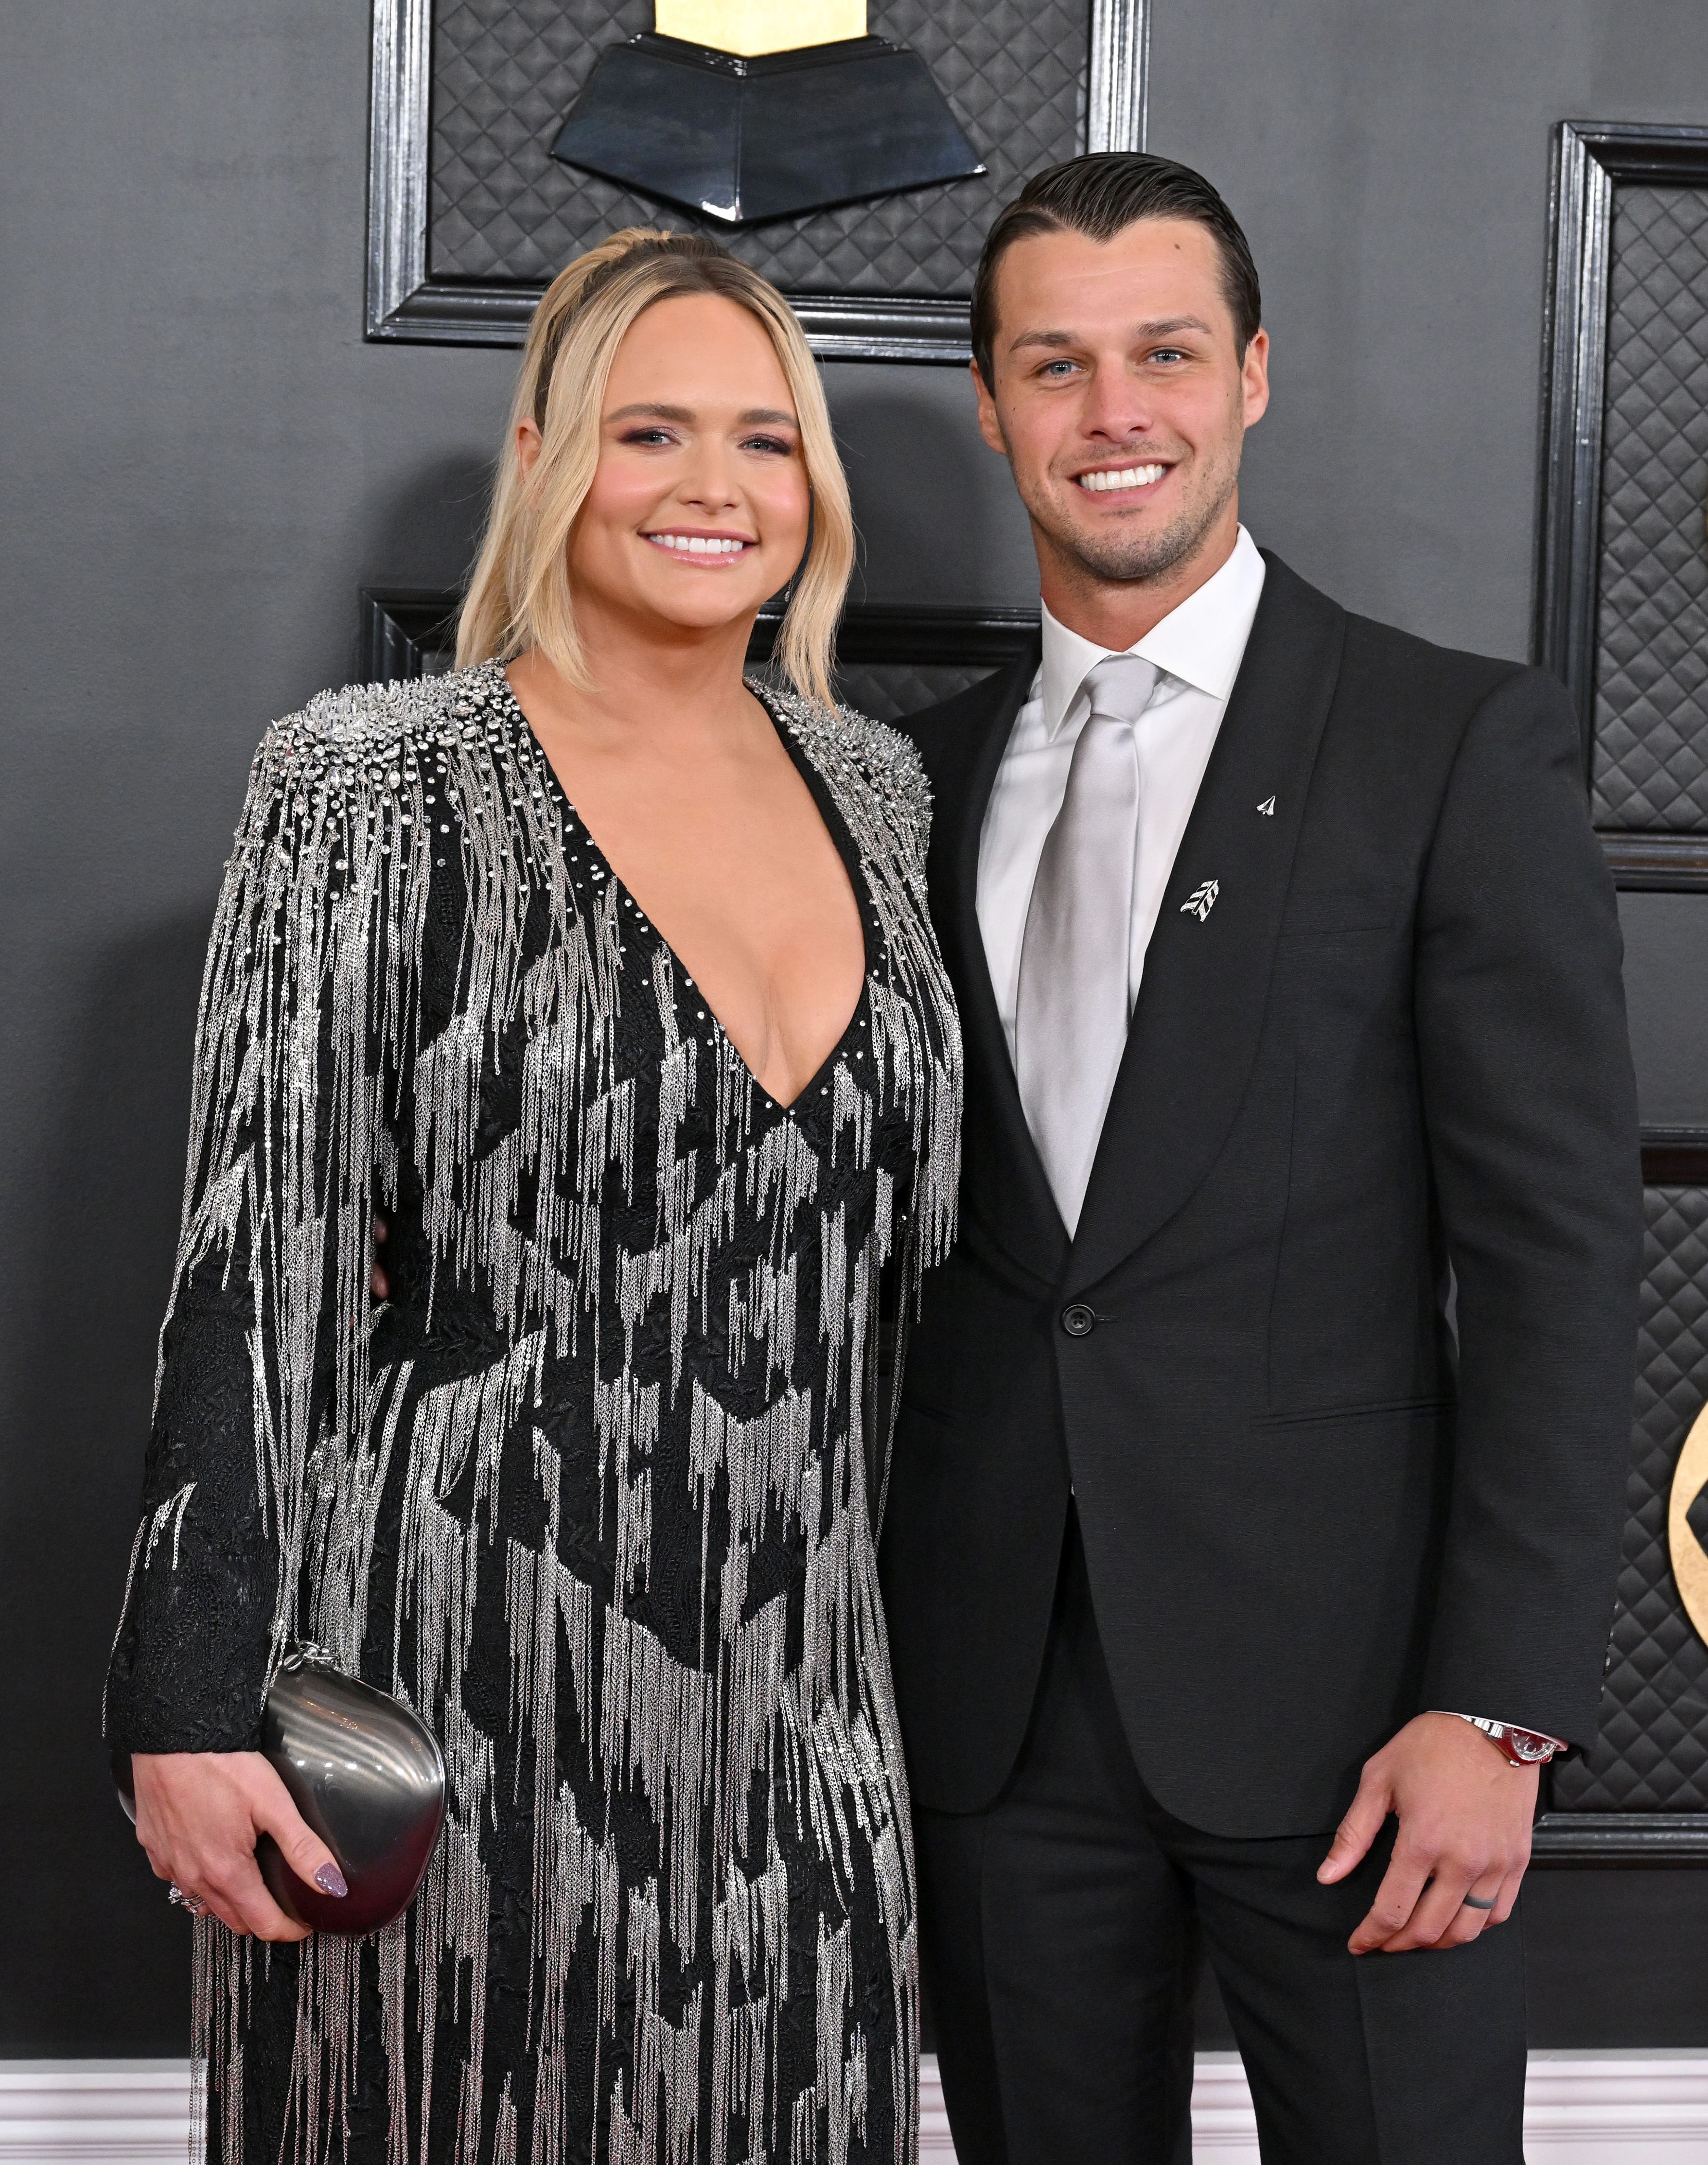 The couple, pictured at the 65th GRAMMY Awards, got together ahead of the pandemic and decided to tie the knot